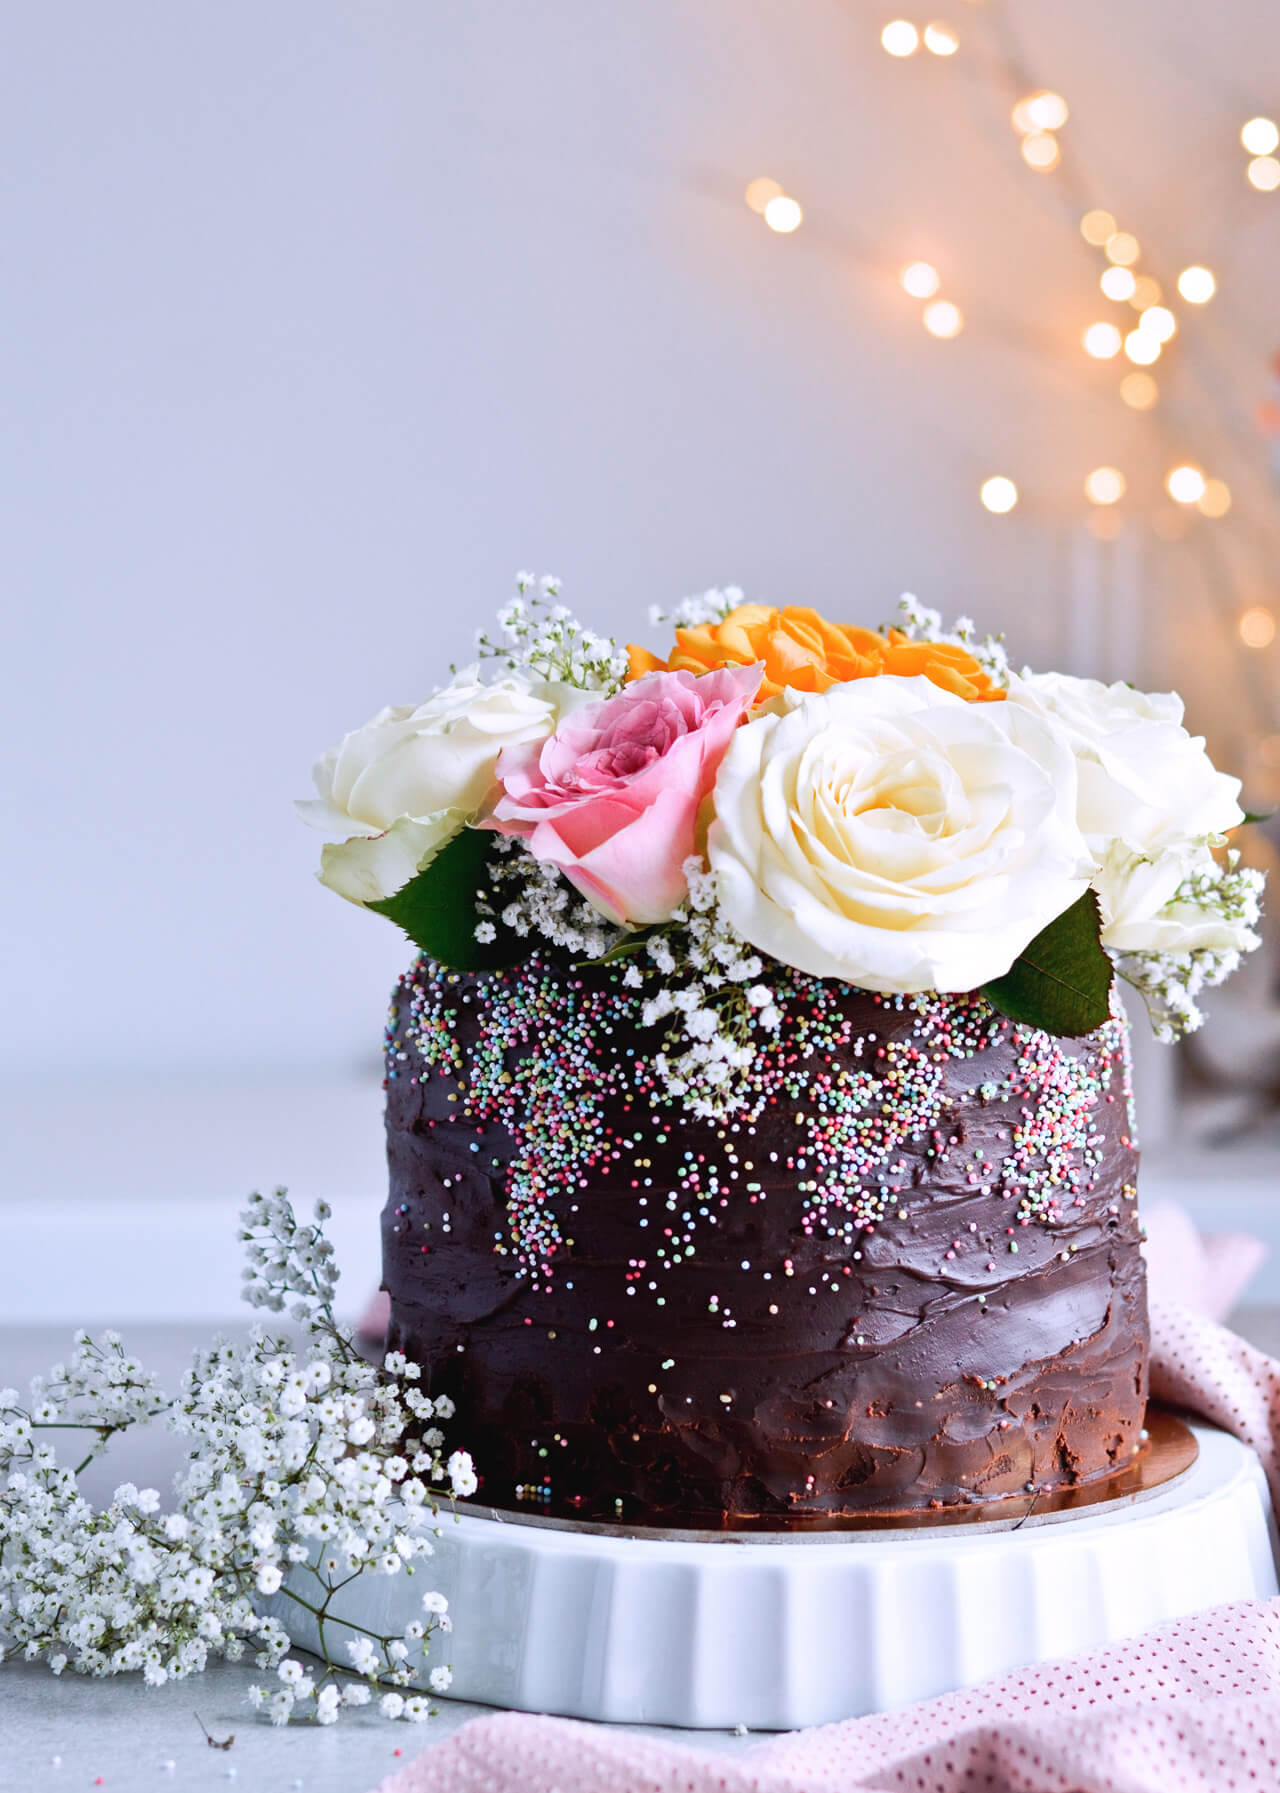 Recipe for Chocolate lover's triple chocolate ganache layer cake, every chocoholic's dream come true! Made with coffee, rich bittersweet chocolate and cream, but no butter, this chocolate cake is smooth and addicting! Topped with sprinkles and flowers, to make it super pretty. | sugarsalted.com